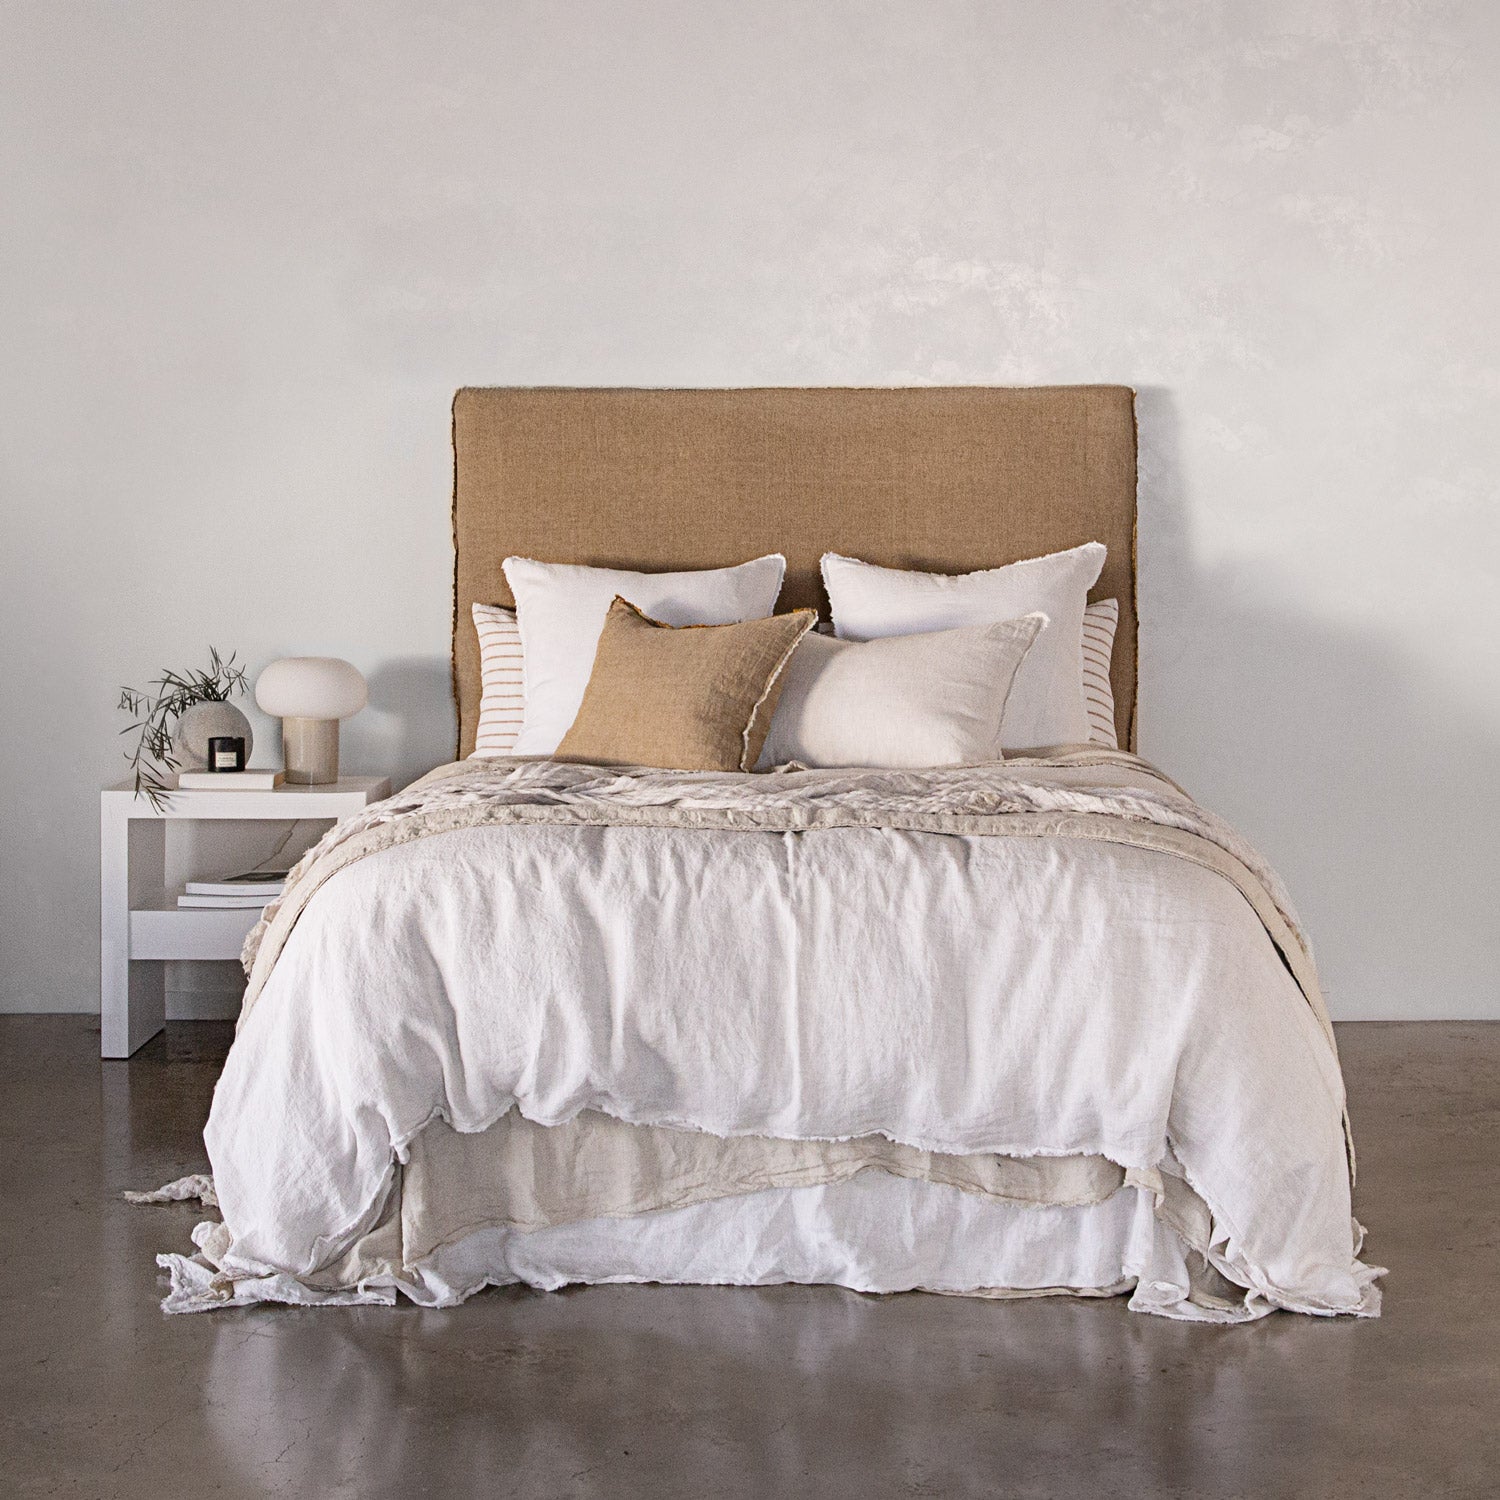 Linen Bedhead & Cover | Rich Toffee | Hale Mercantile Co.